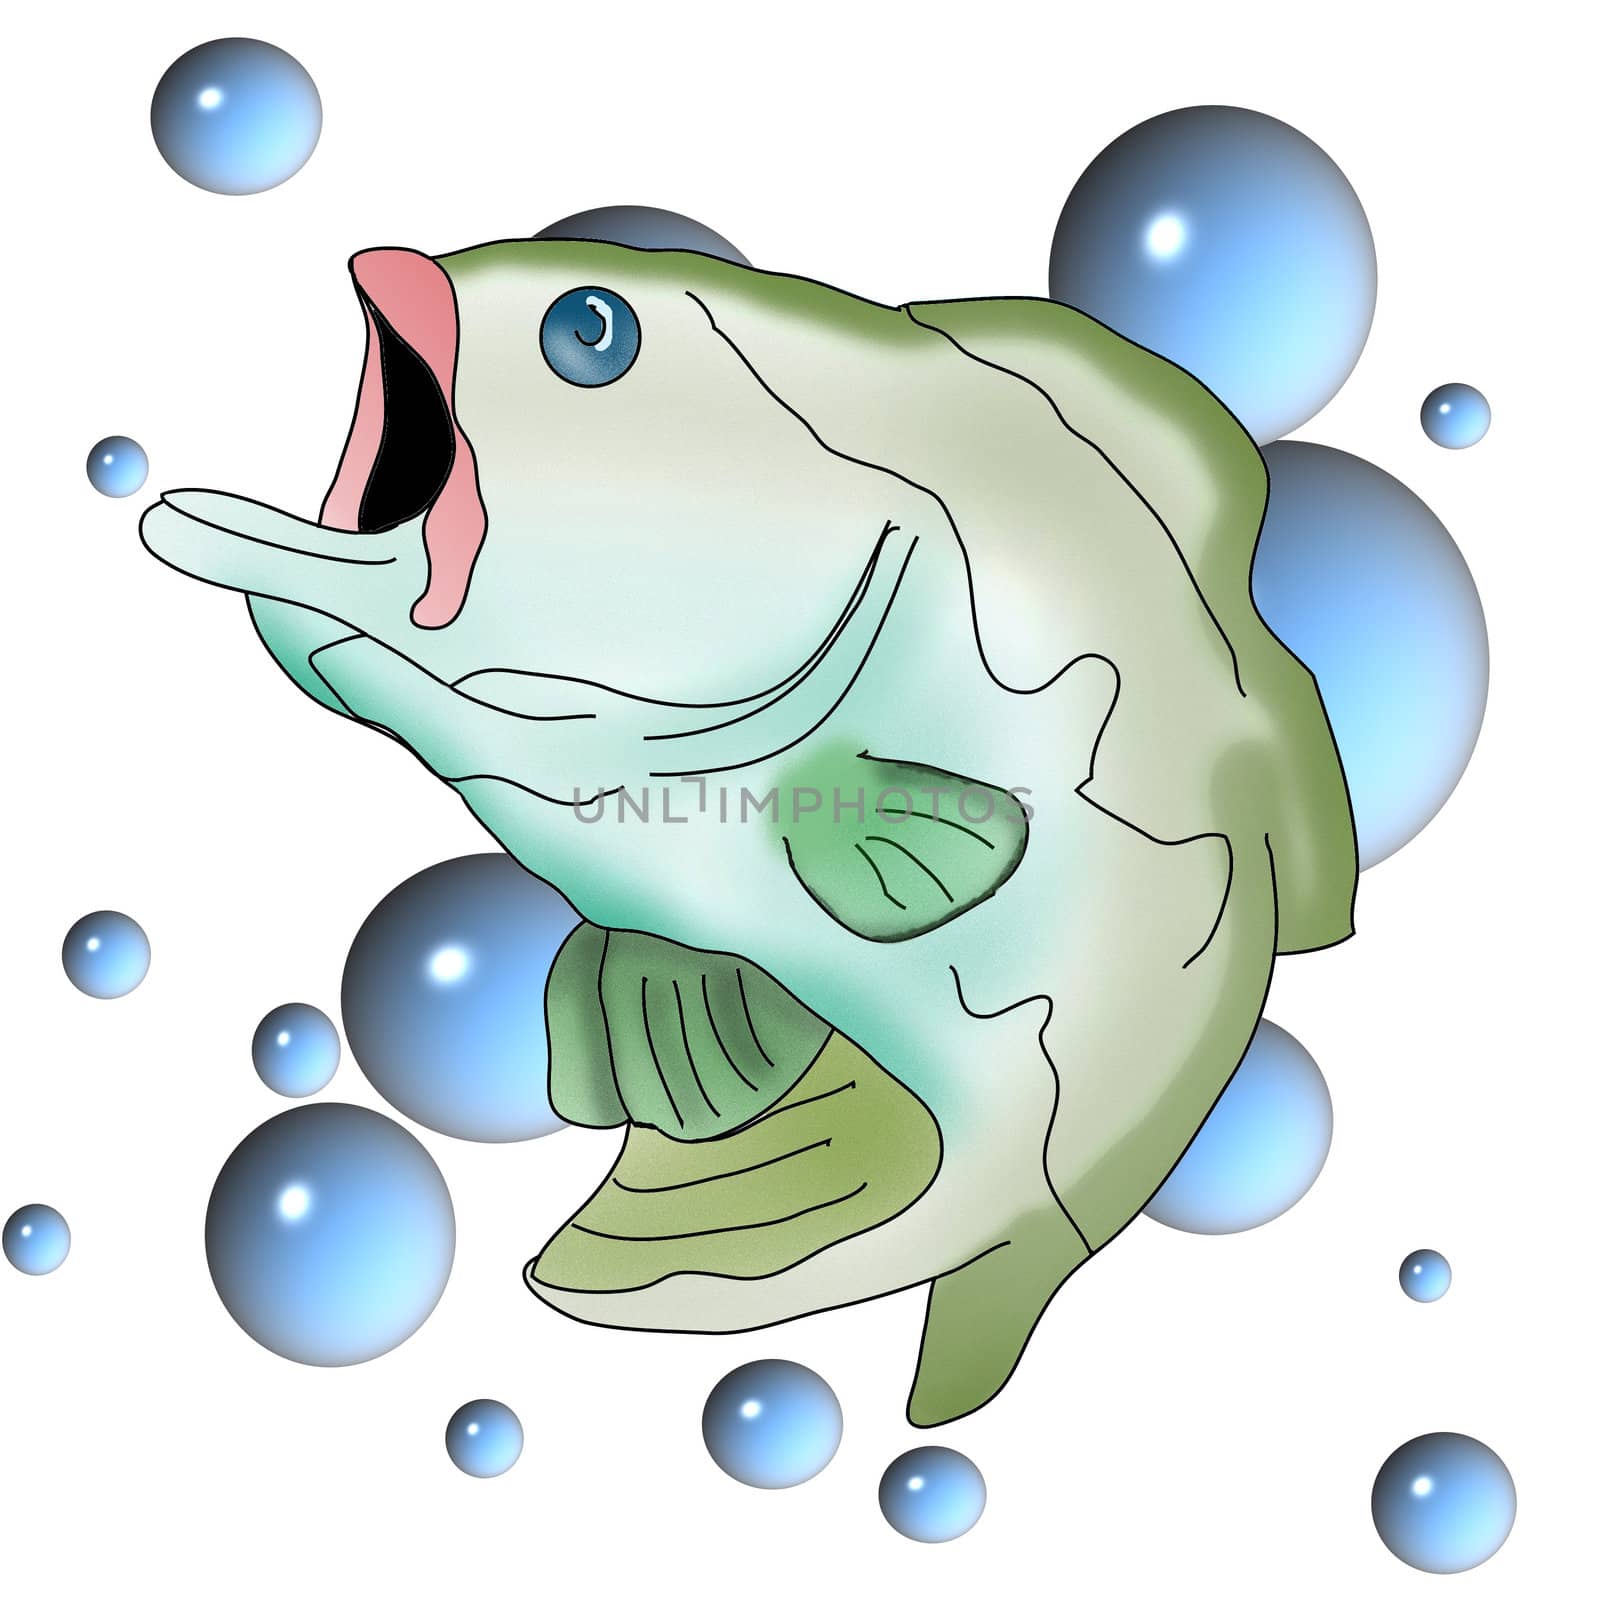 Colorful Illustration of a green bass against a background of blue bubbles.